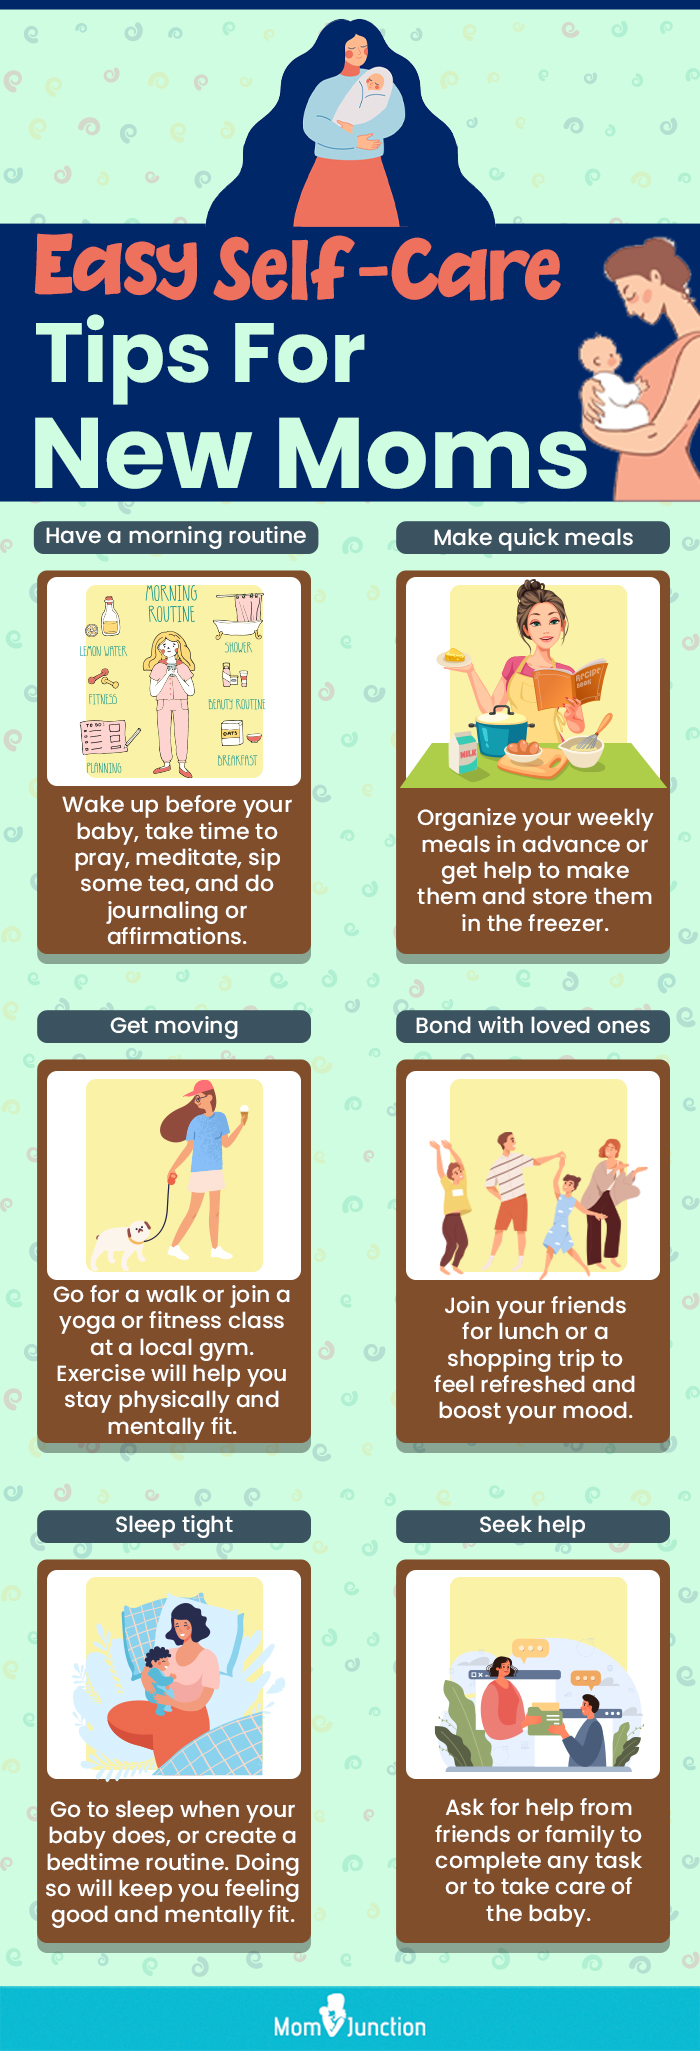 easy self care tips for new moms (infographic)